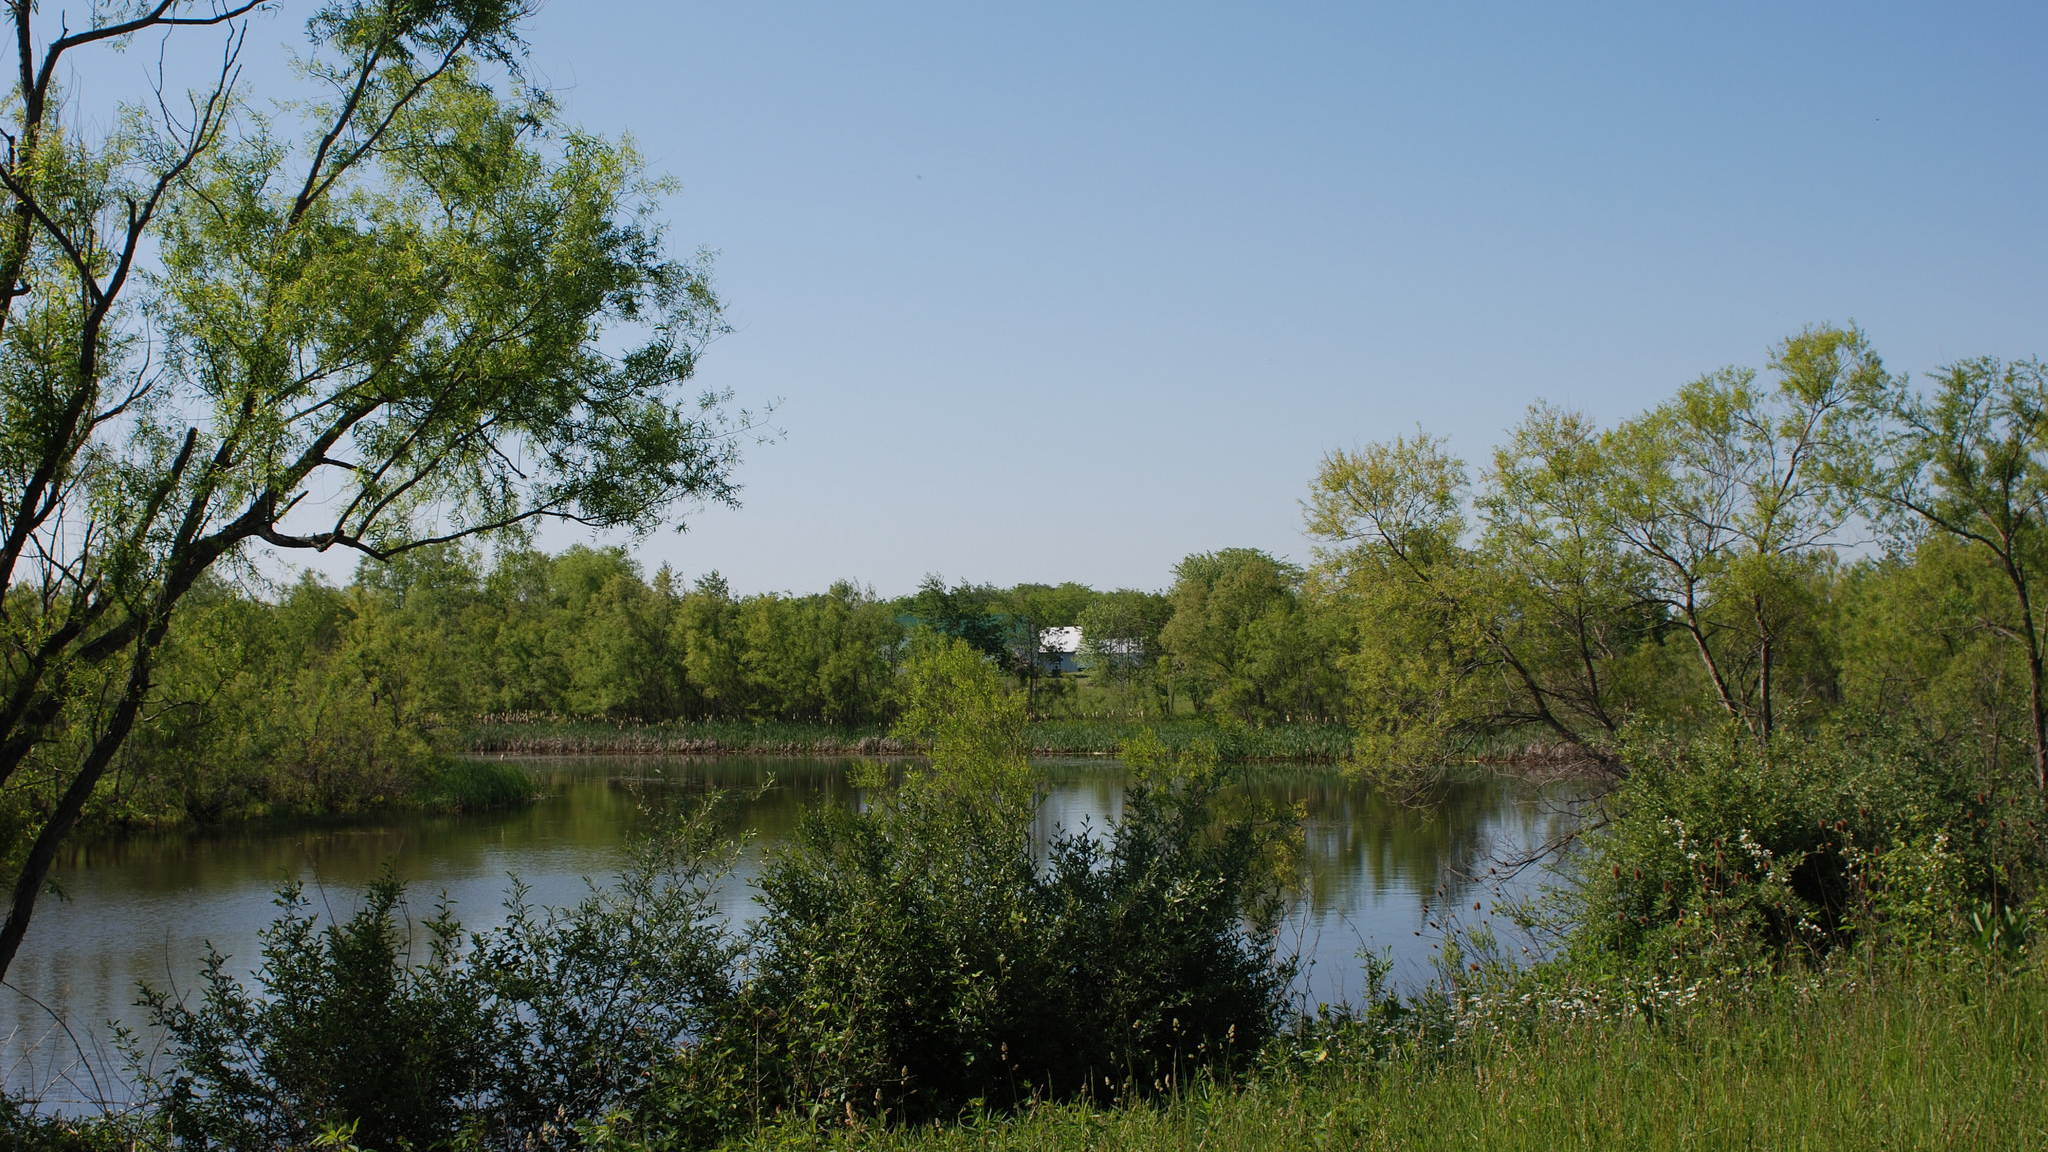 Gail Dunlap used the U.S. Department of Agriculture's (USDA) Conservation Reserve Program (CRP) to implement many conservation practices on her land, including restoring nearly seven acres of wetlands on one of her Ohio farms. Photo © USDA / Flickr through a Creative Commons license 